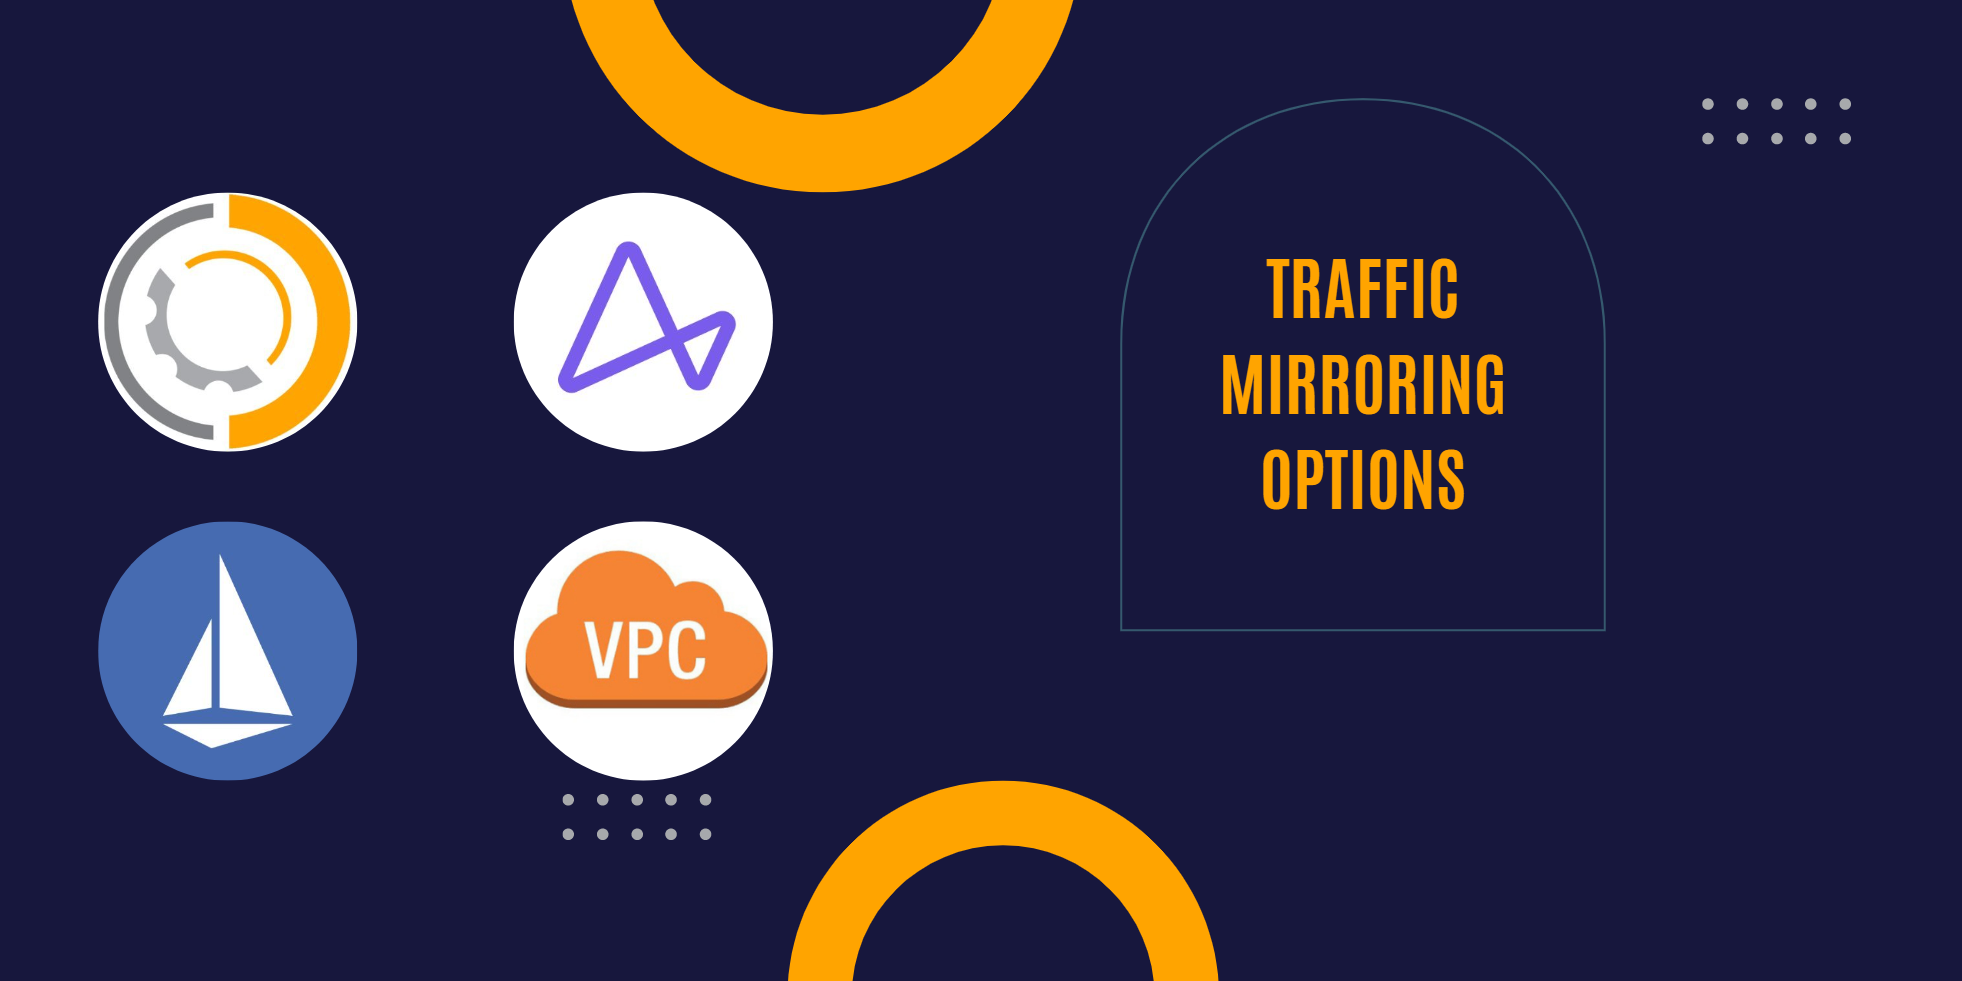 Graphic showing the different traffic mirroring options